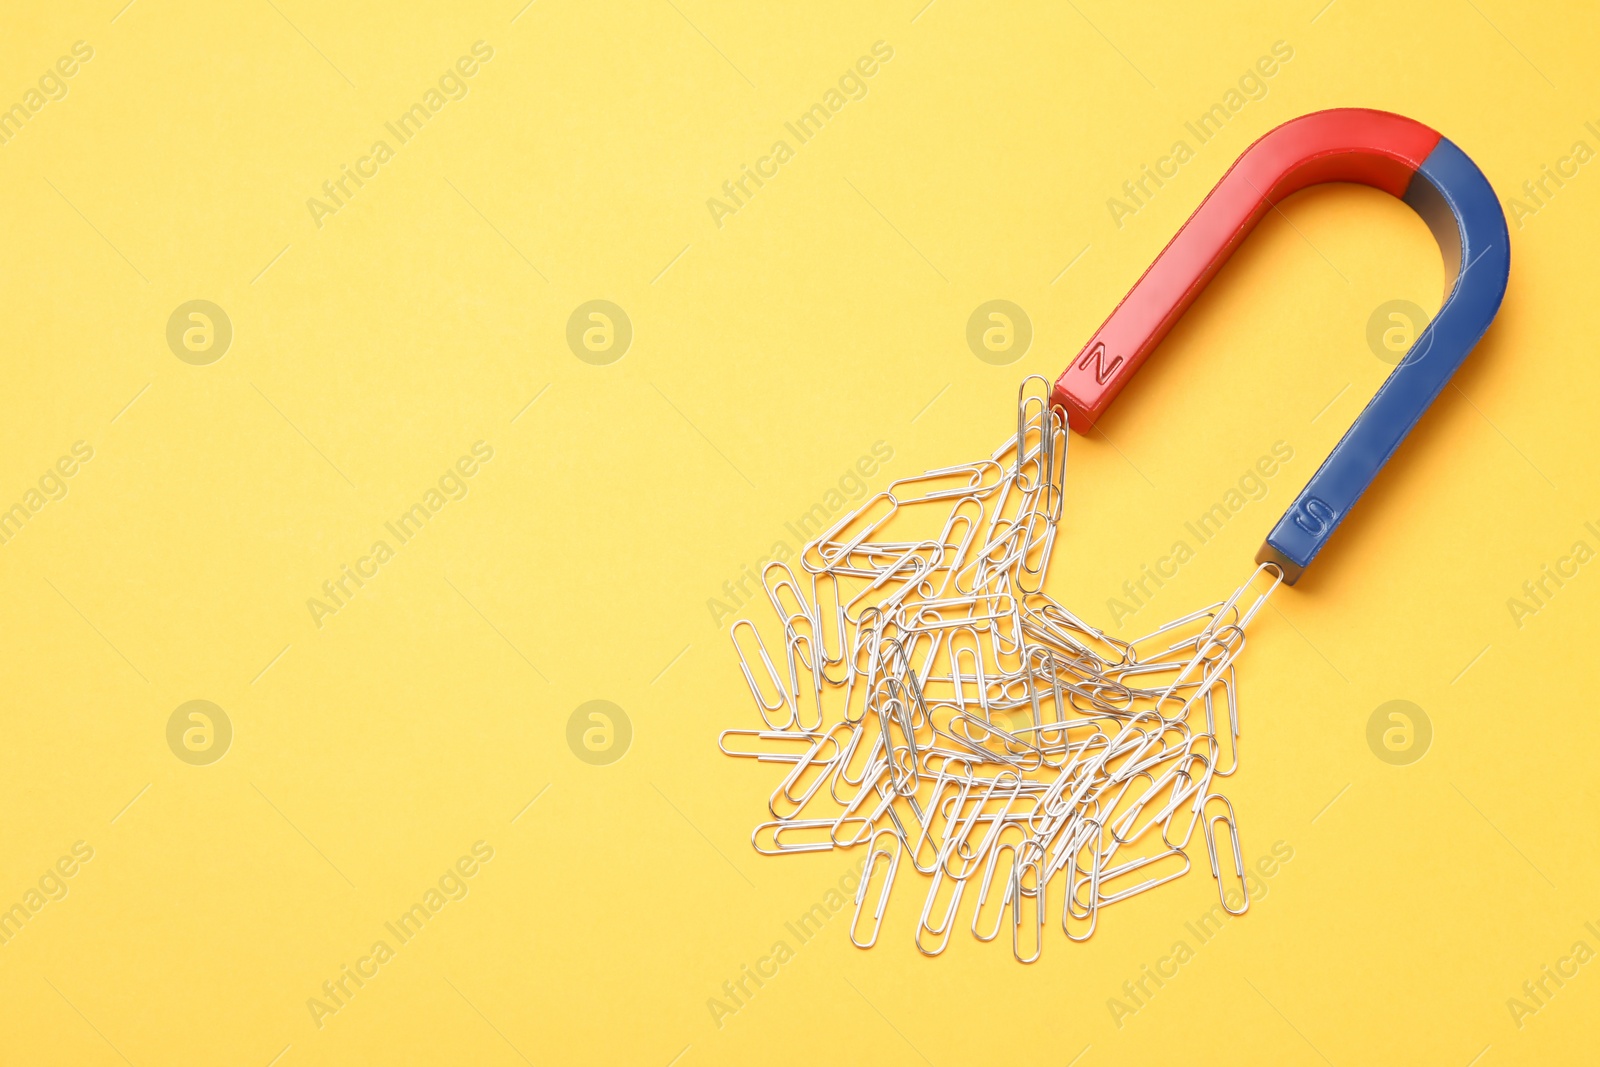 Photo of Magnet attracting paper clips on color background, top view with space for text